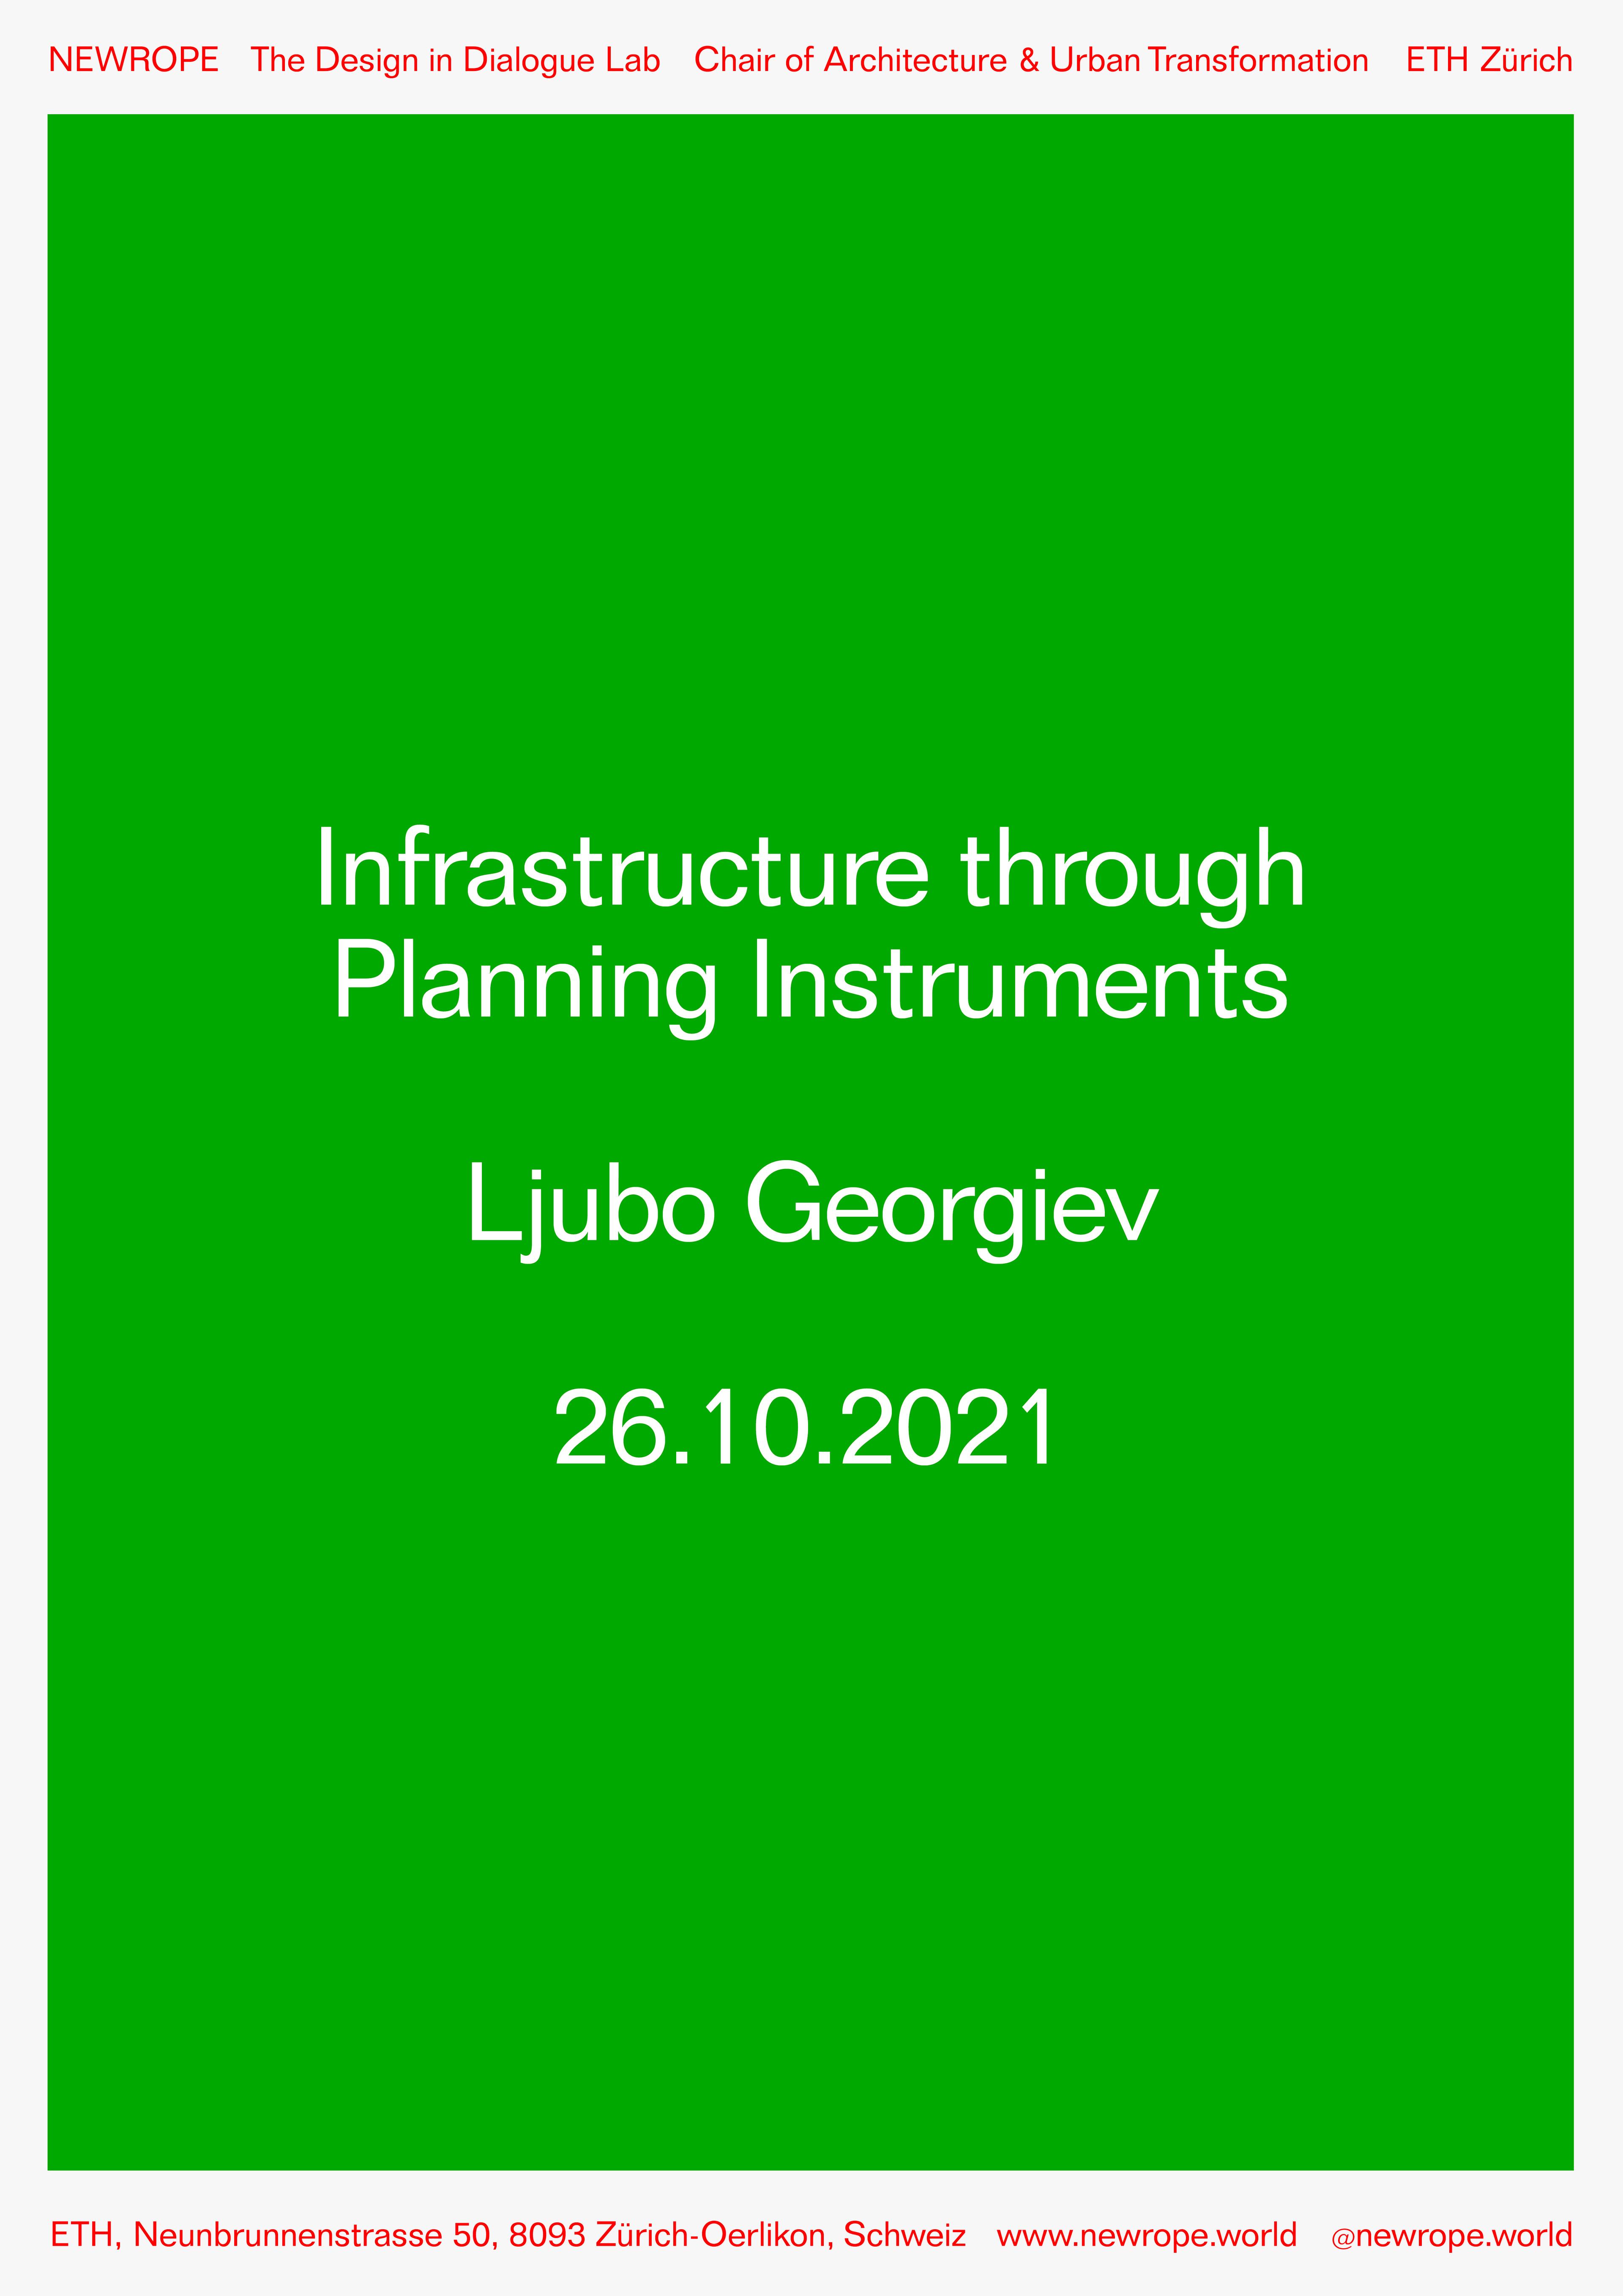 Announcement: Ljubo Georgiev "We need to talk about Infrastructure"